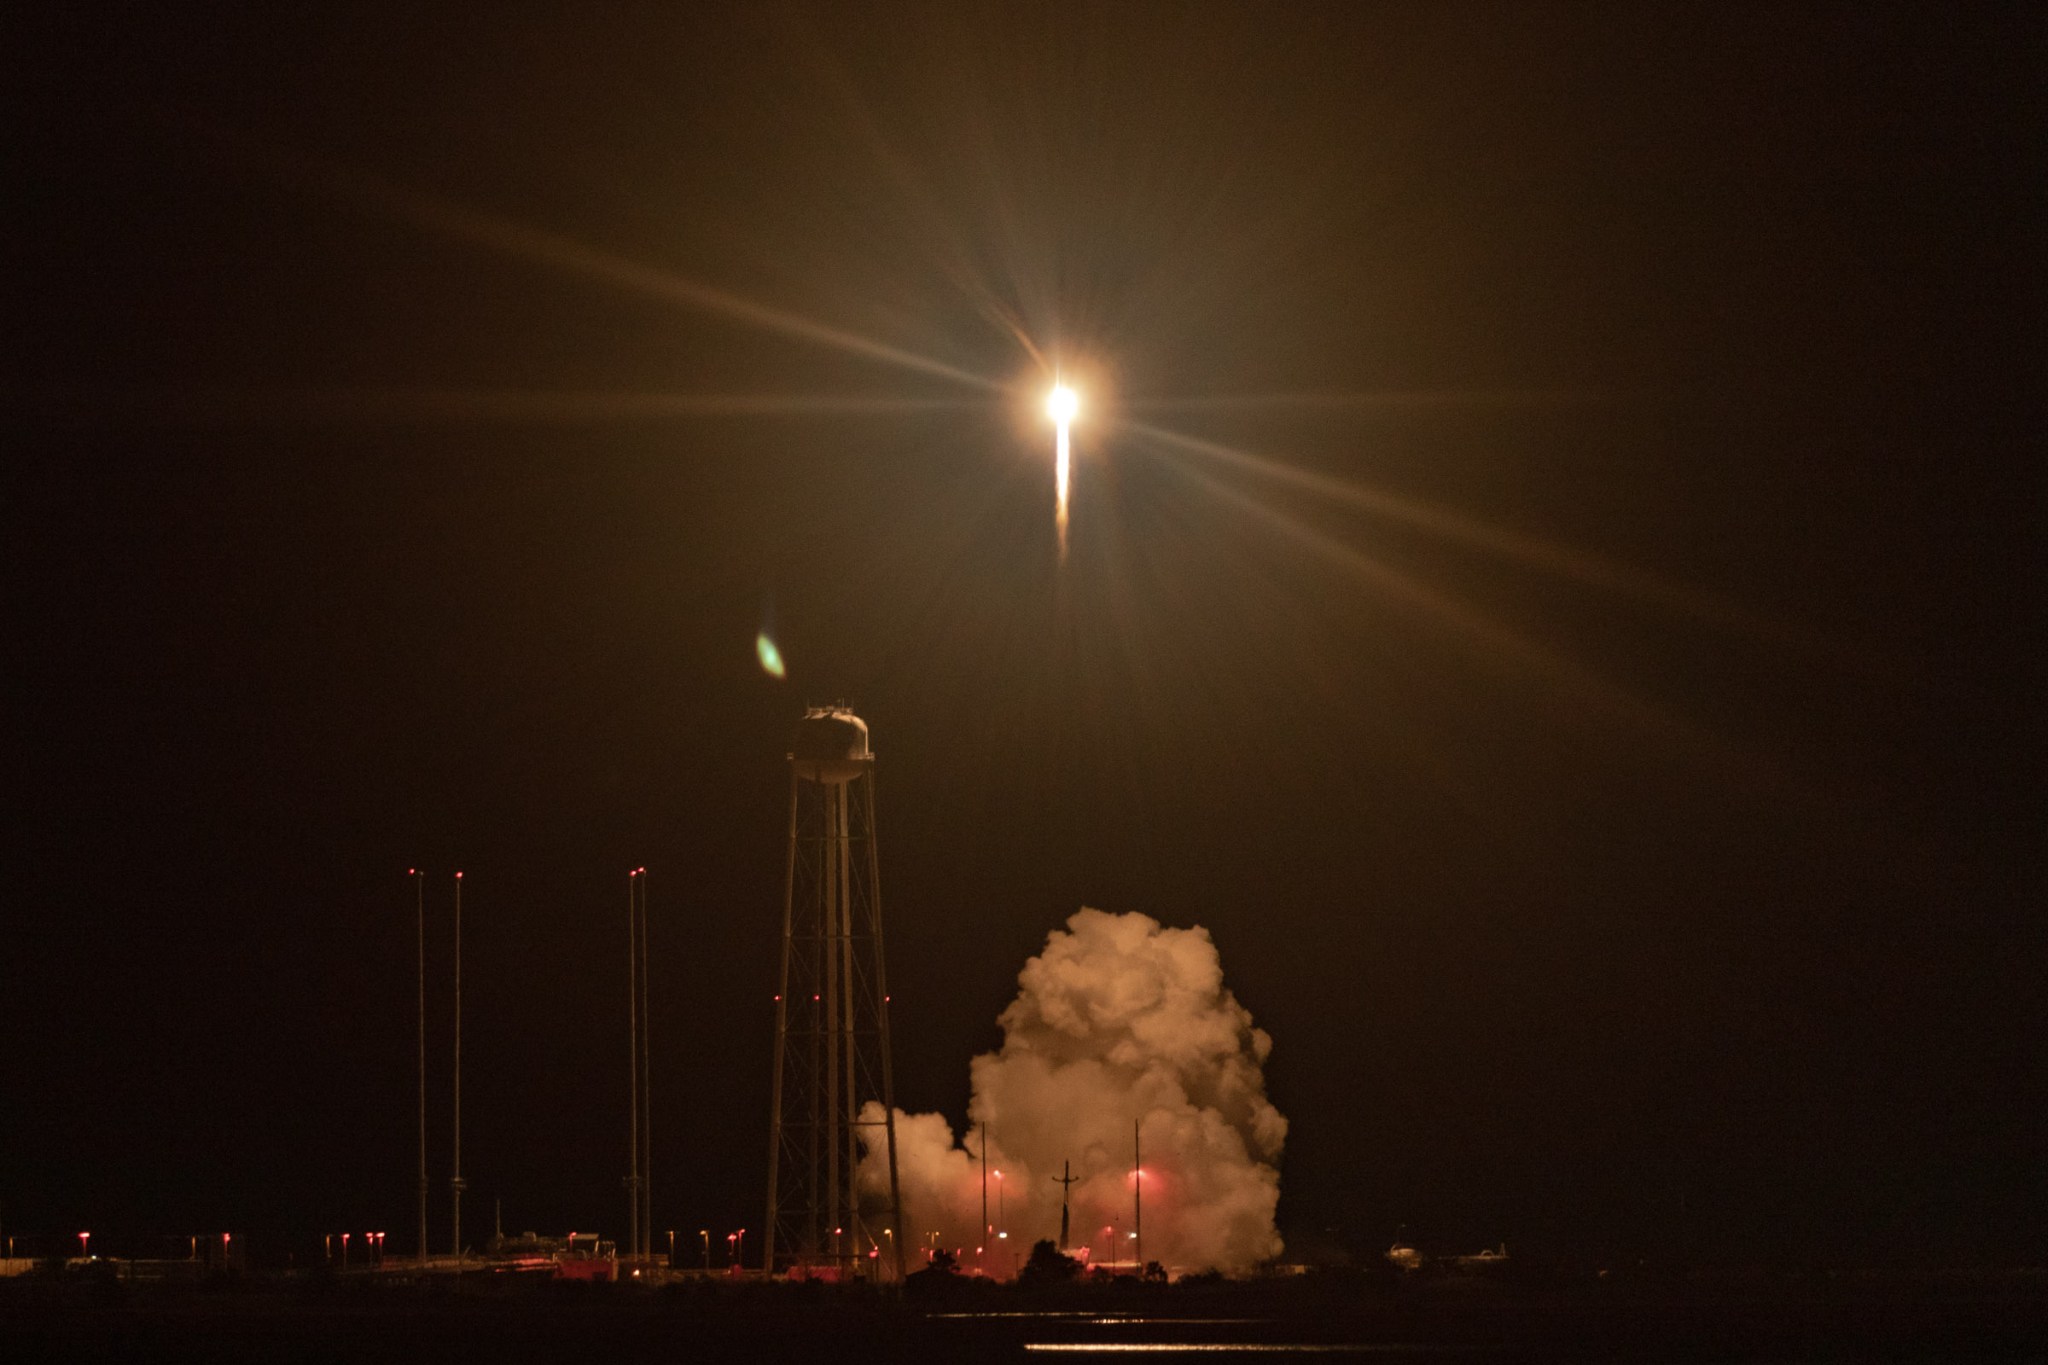 A rocket launches off the pad in near pitch black. The rocket is bright in the air with a golden starburst forming around it. A water tower with spindly legs is to left, slightly lit up by the blow of the rocket. A cloud of smoke is formed below.